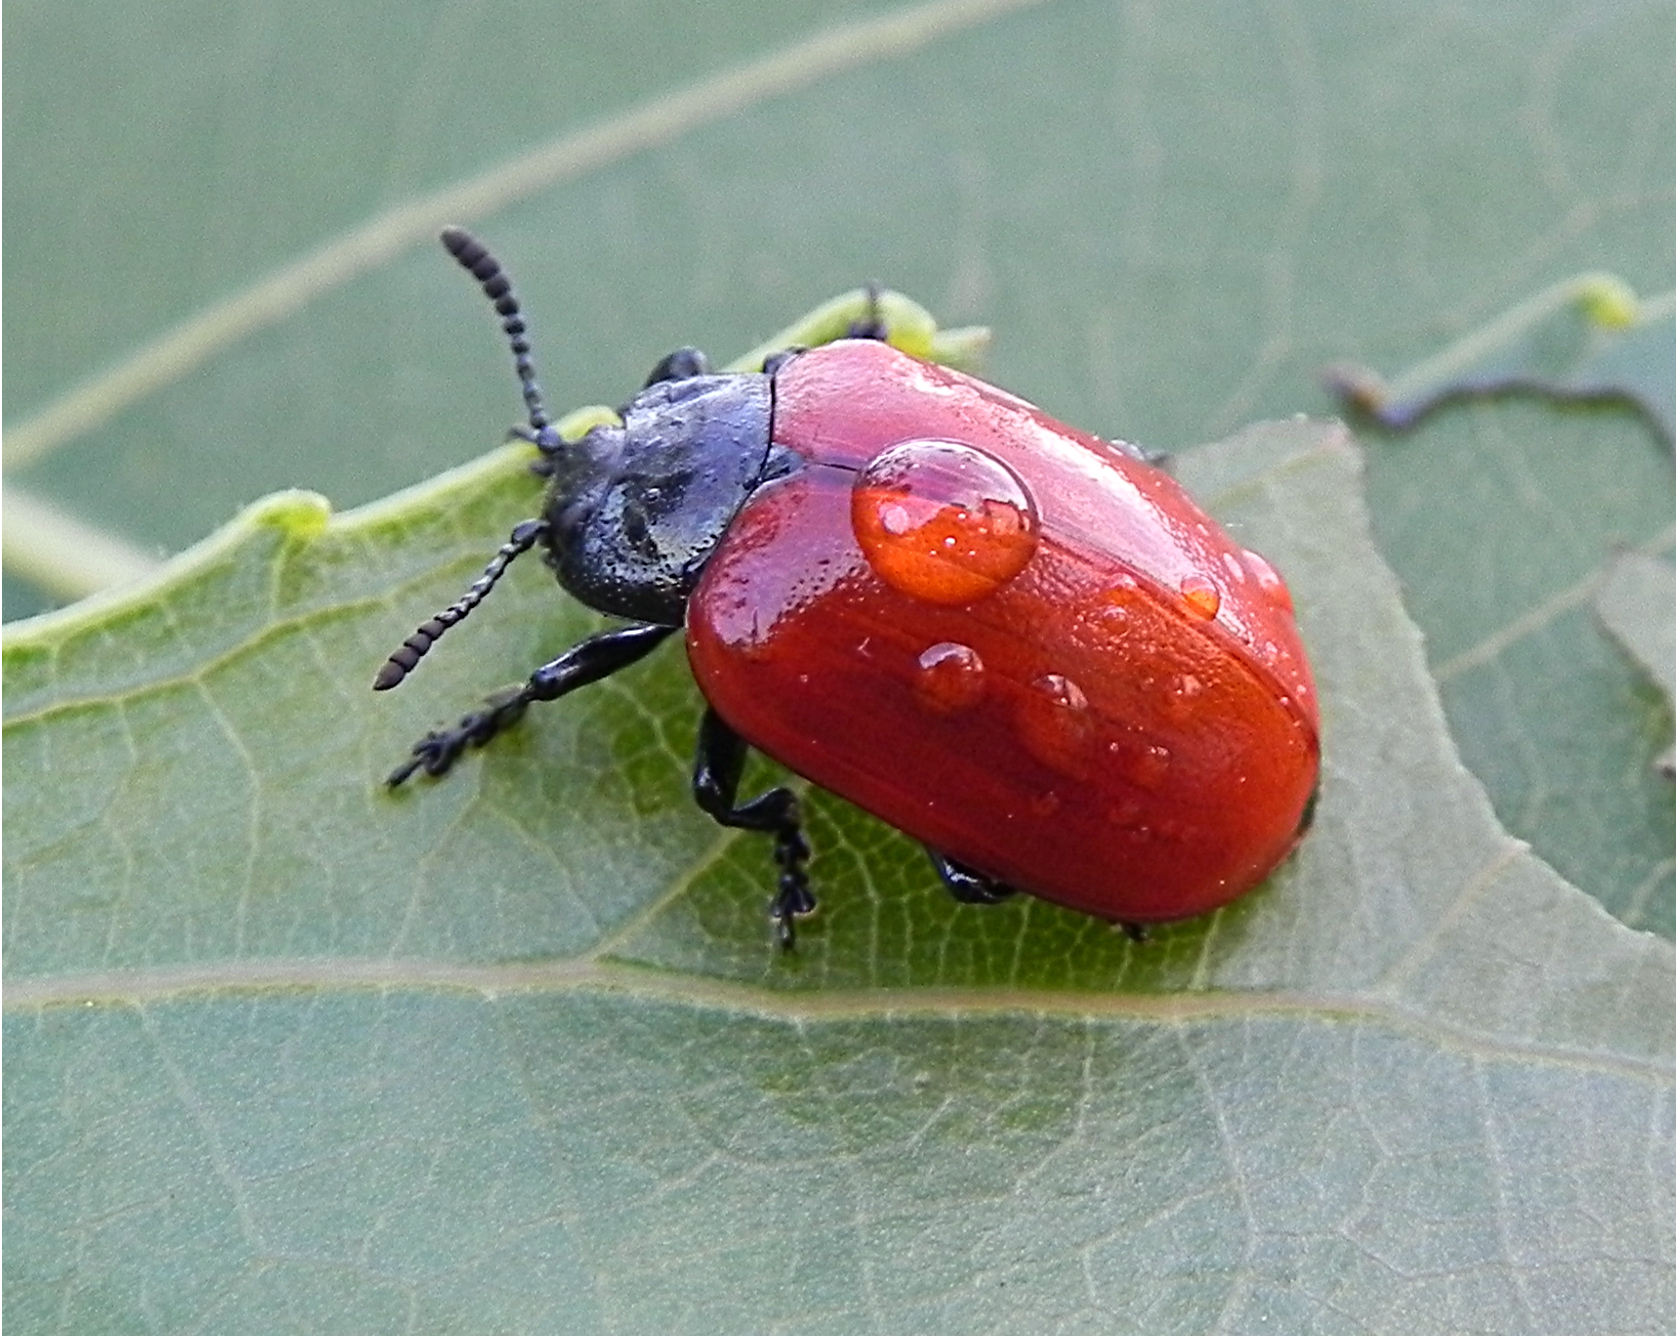 fam. Chrysomelidae. Italia, Brescia, 1 Jun 2014. Provided by Paolo to children for didactics, but not shot with them.